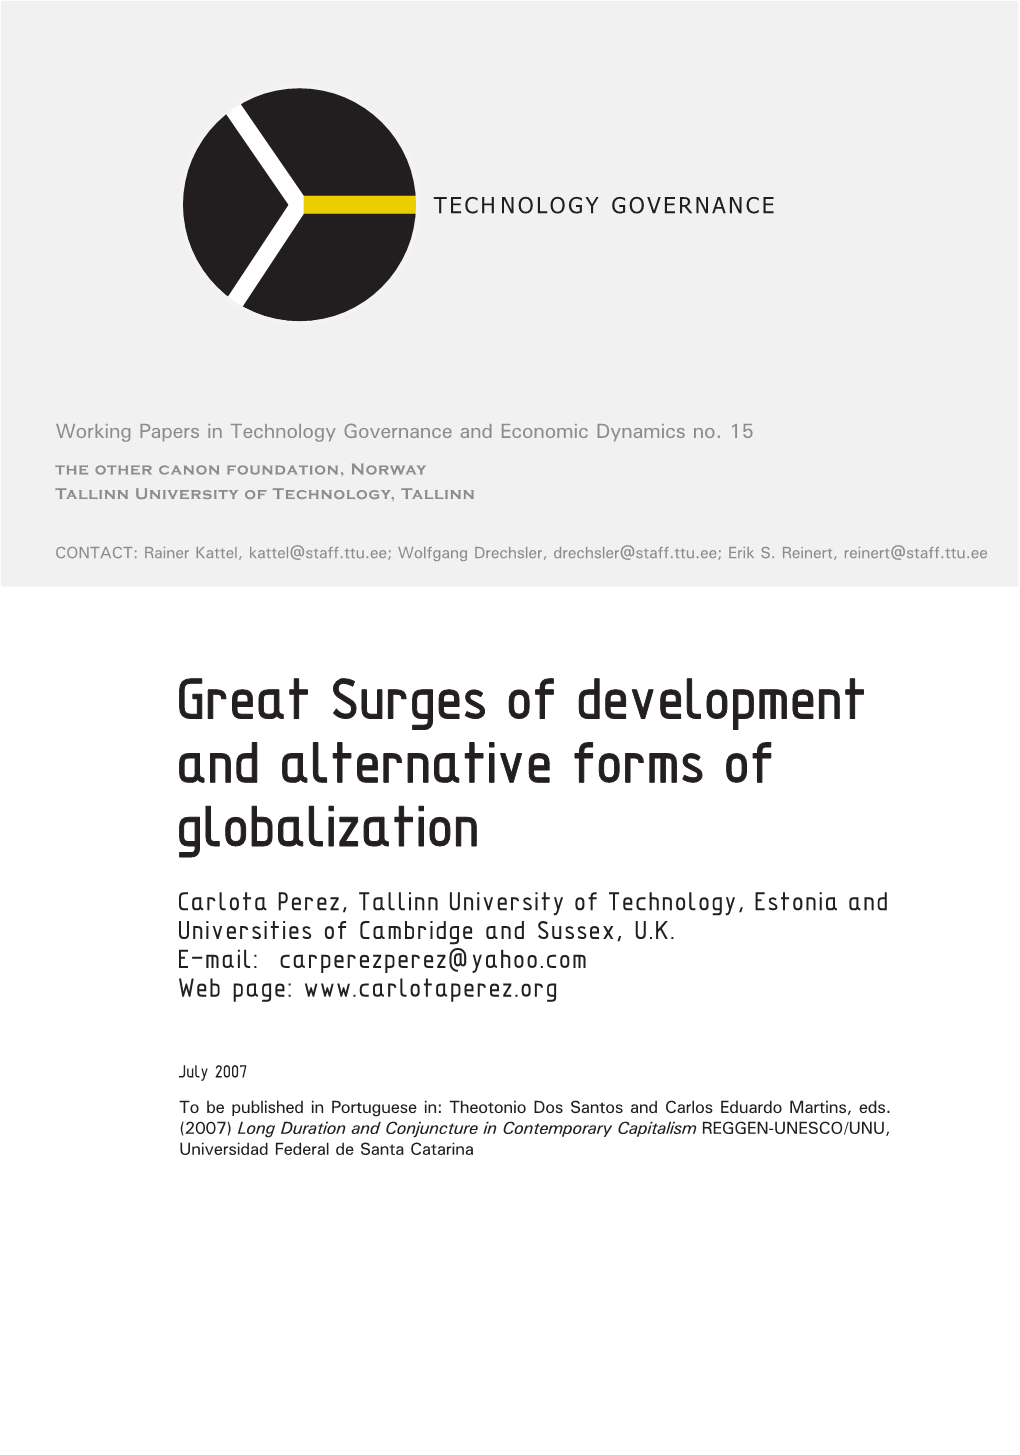 Great Surges of Development and Alternative Forms of Globalization